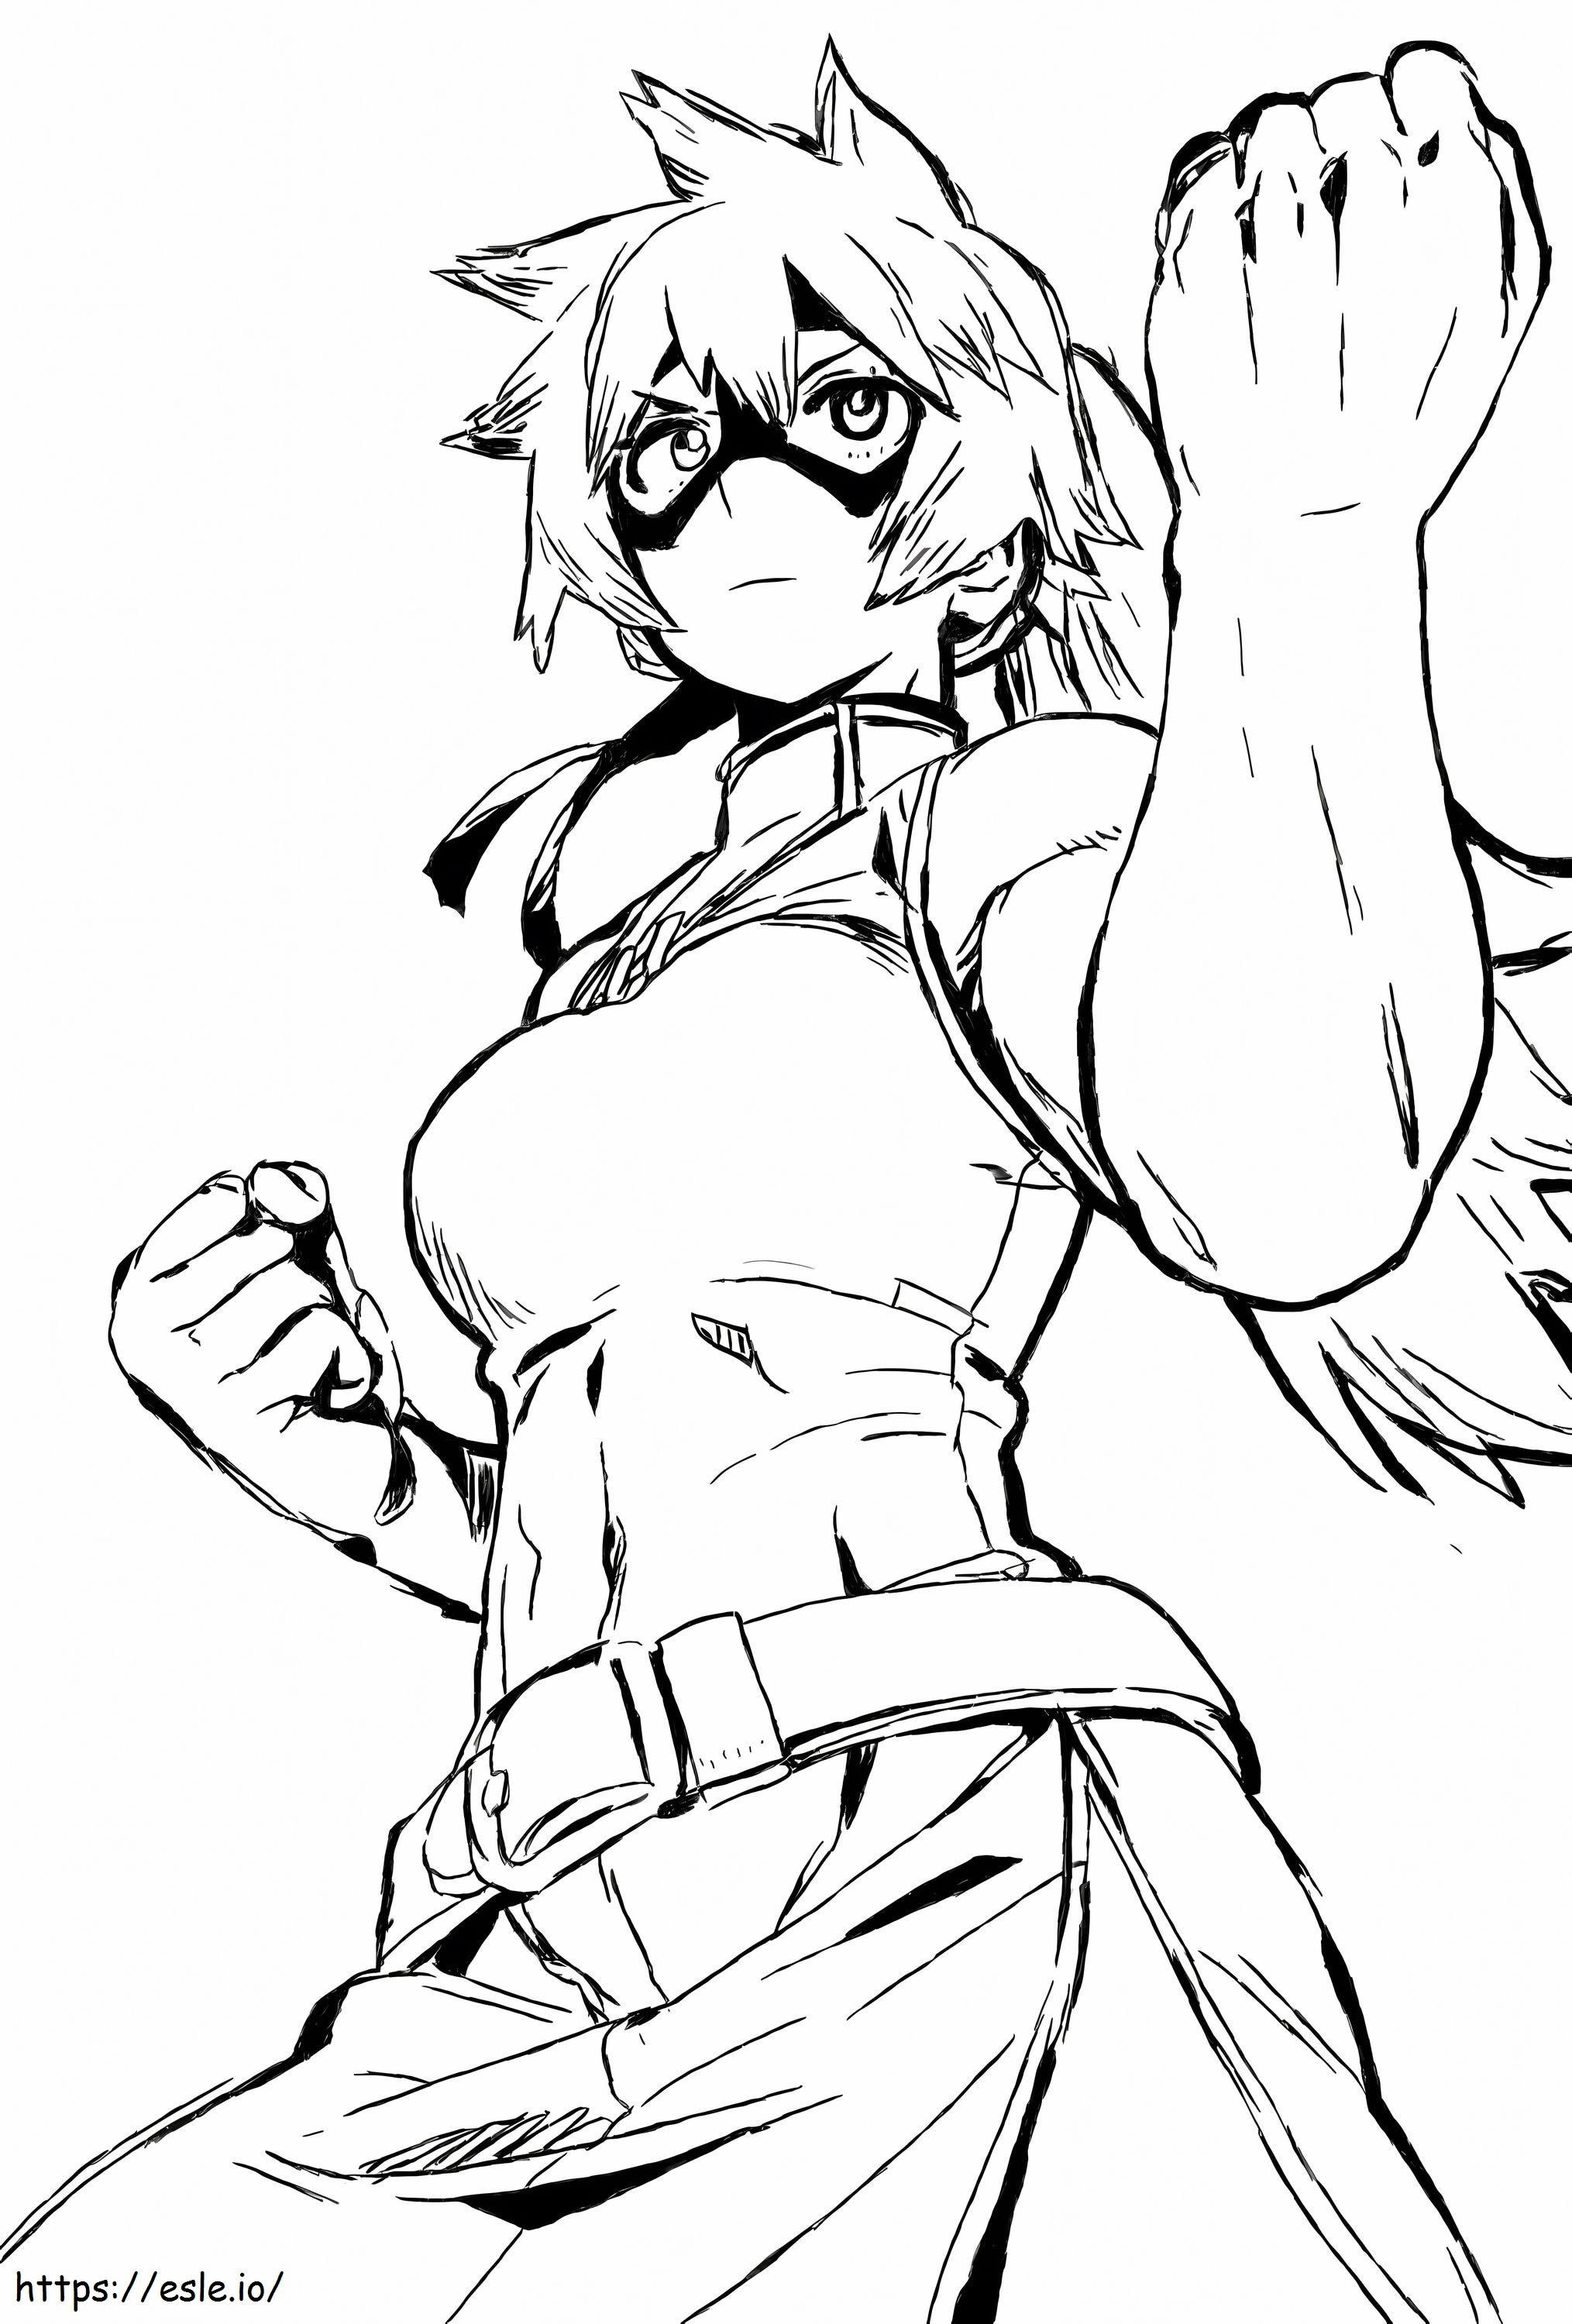 Itsuka Kendo From My Hero Academia coloring page